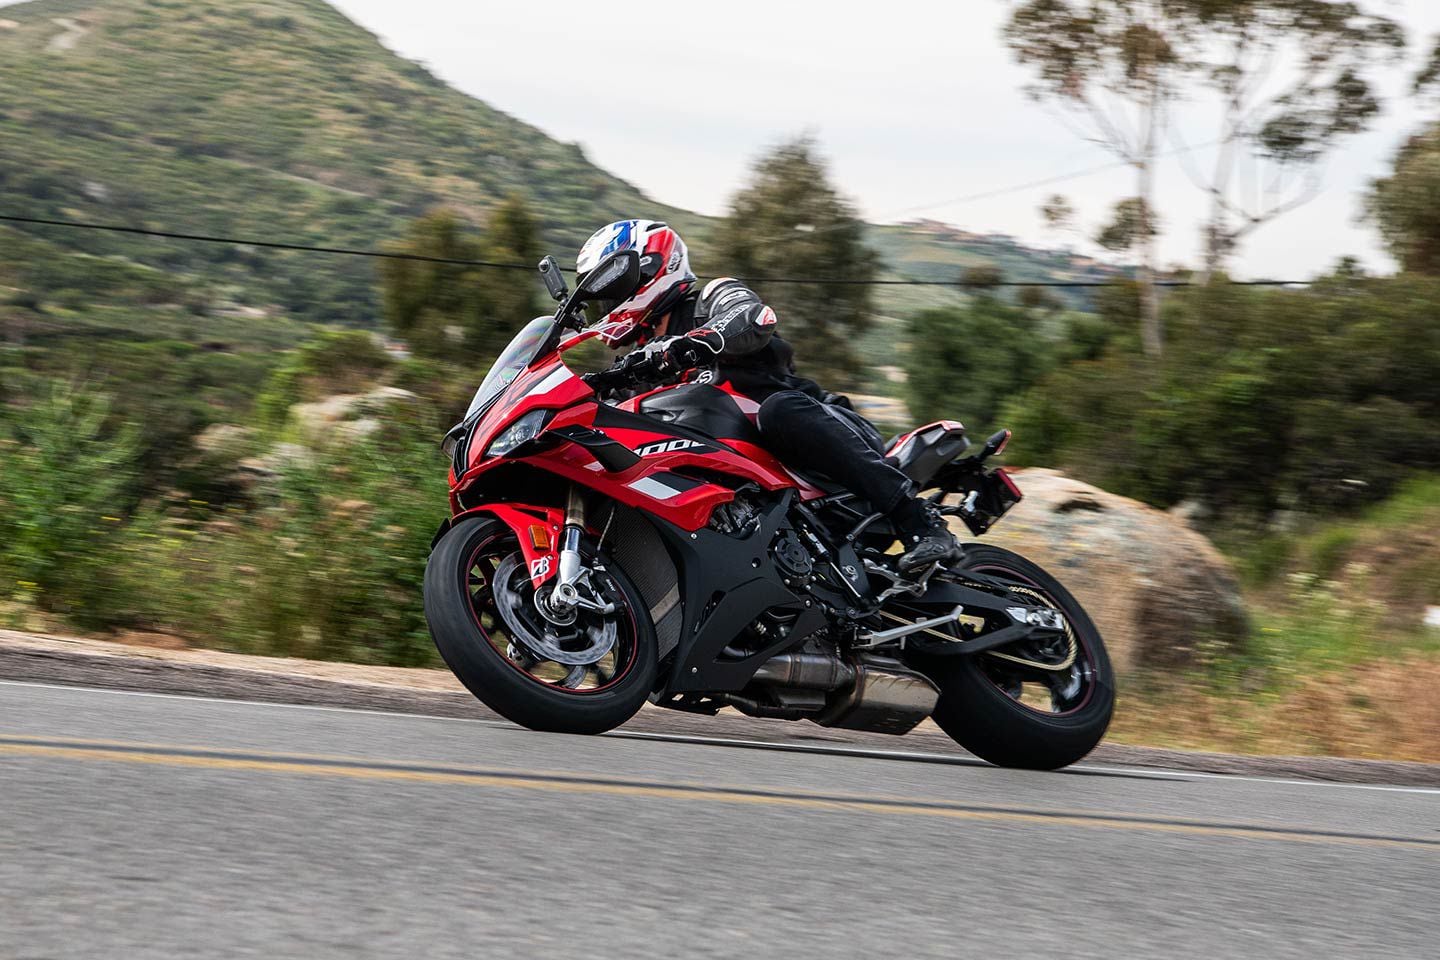 BMW’s wickedly potent S 1000 RR offers a proper test of tires. The S23 delivers with a combination of excellent grip, stability, and neutral handling.